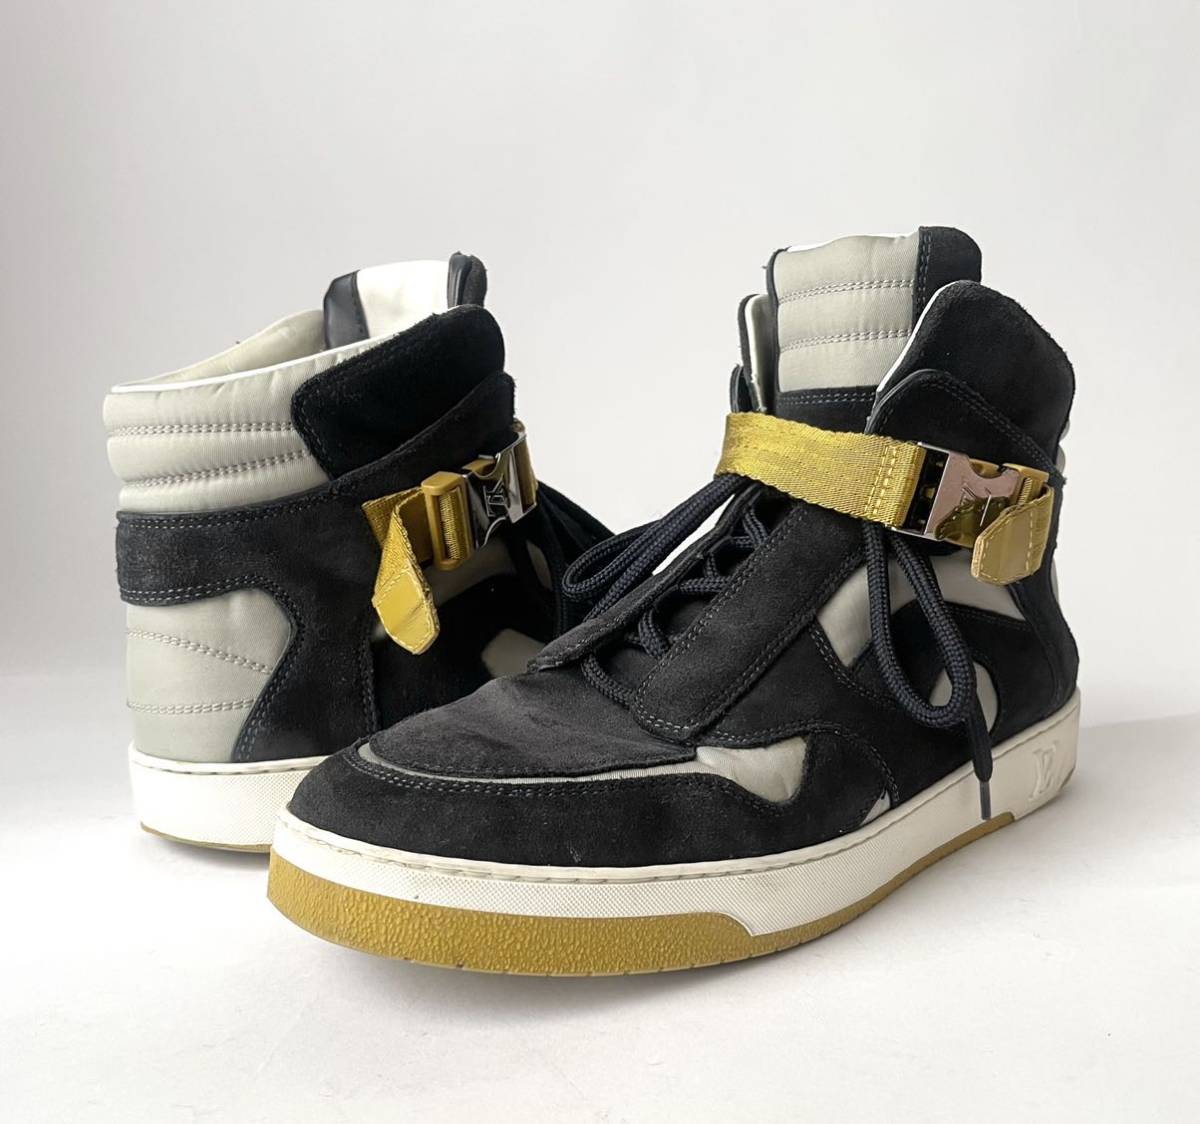 Louis Vuitton Paris SlipStream Sneaker made in Italy LV ルイ